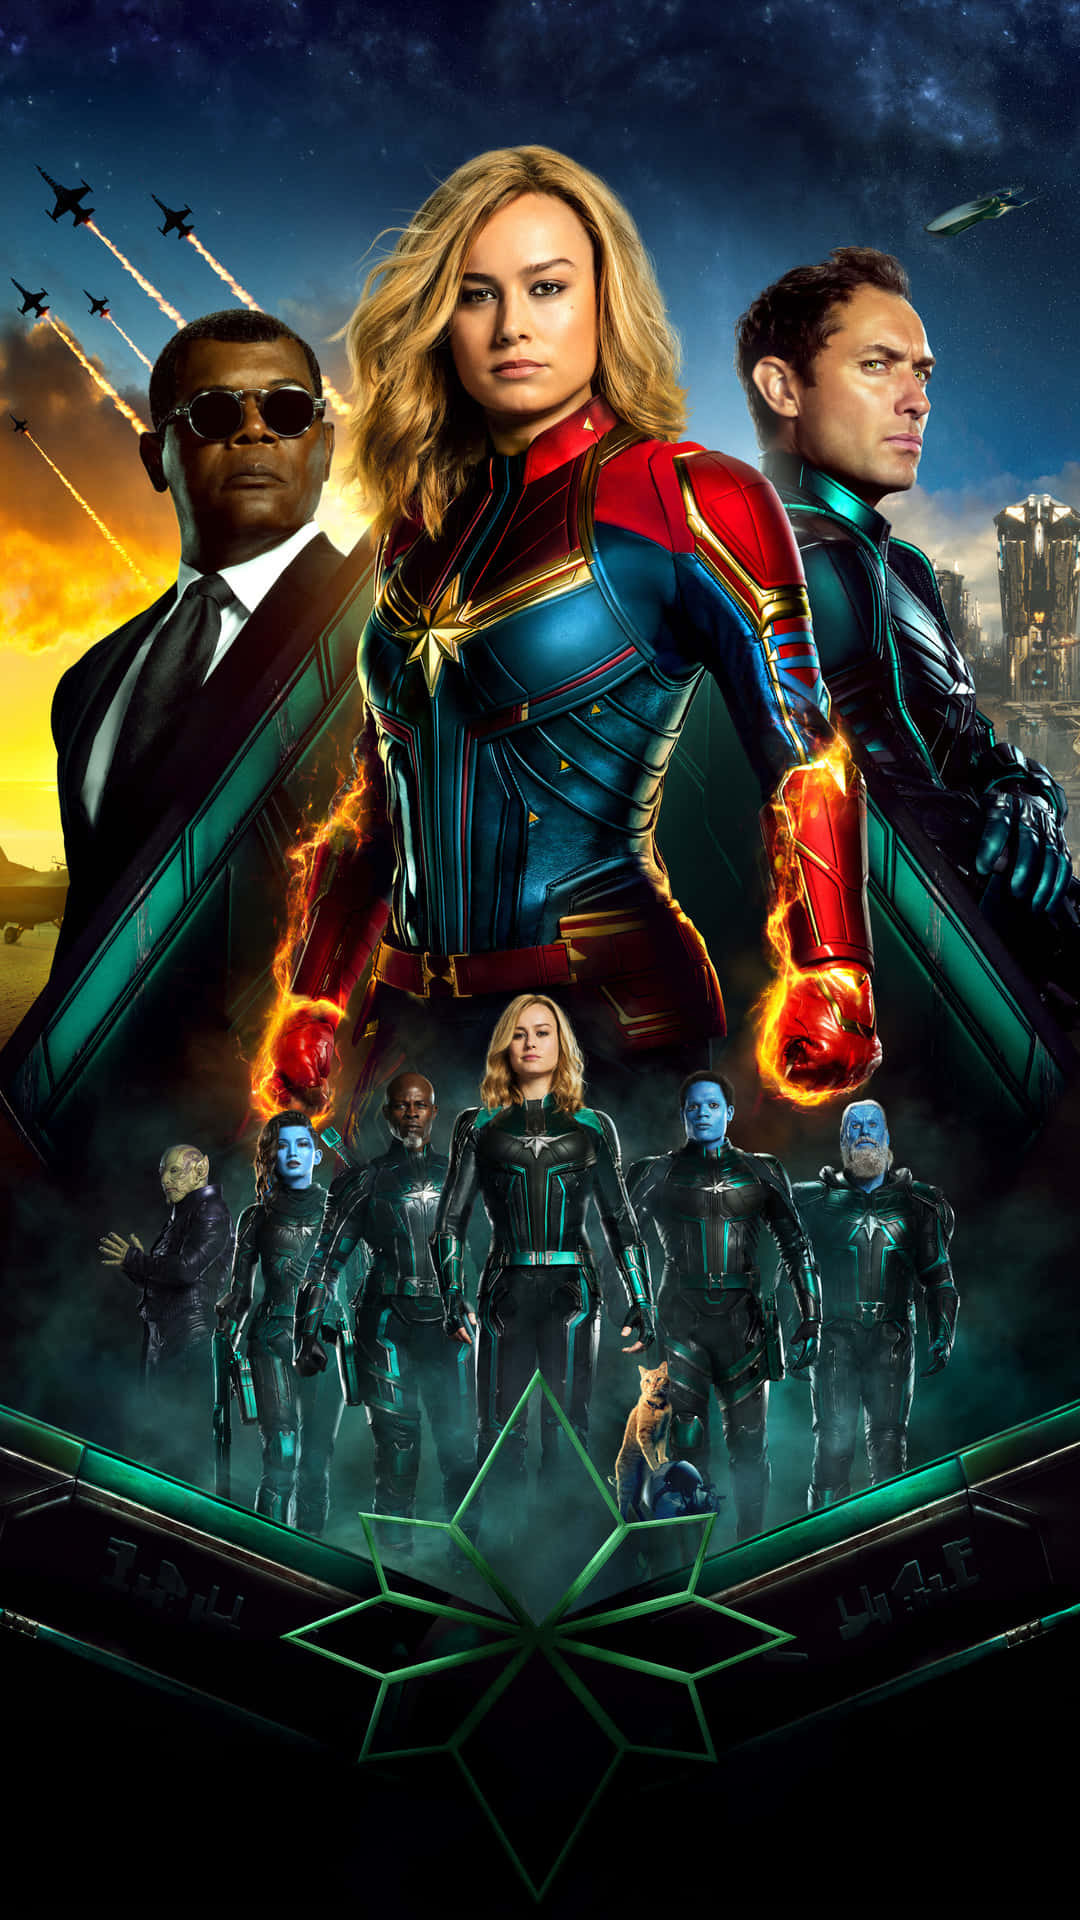 Brie Larson as the powerful superhero, Captain Marvel 2, ready to use her extraordinary powers to fight evil. Wallpaper